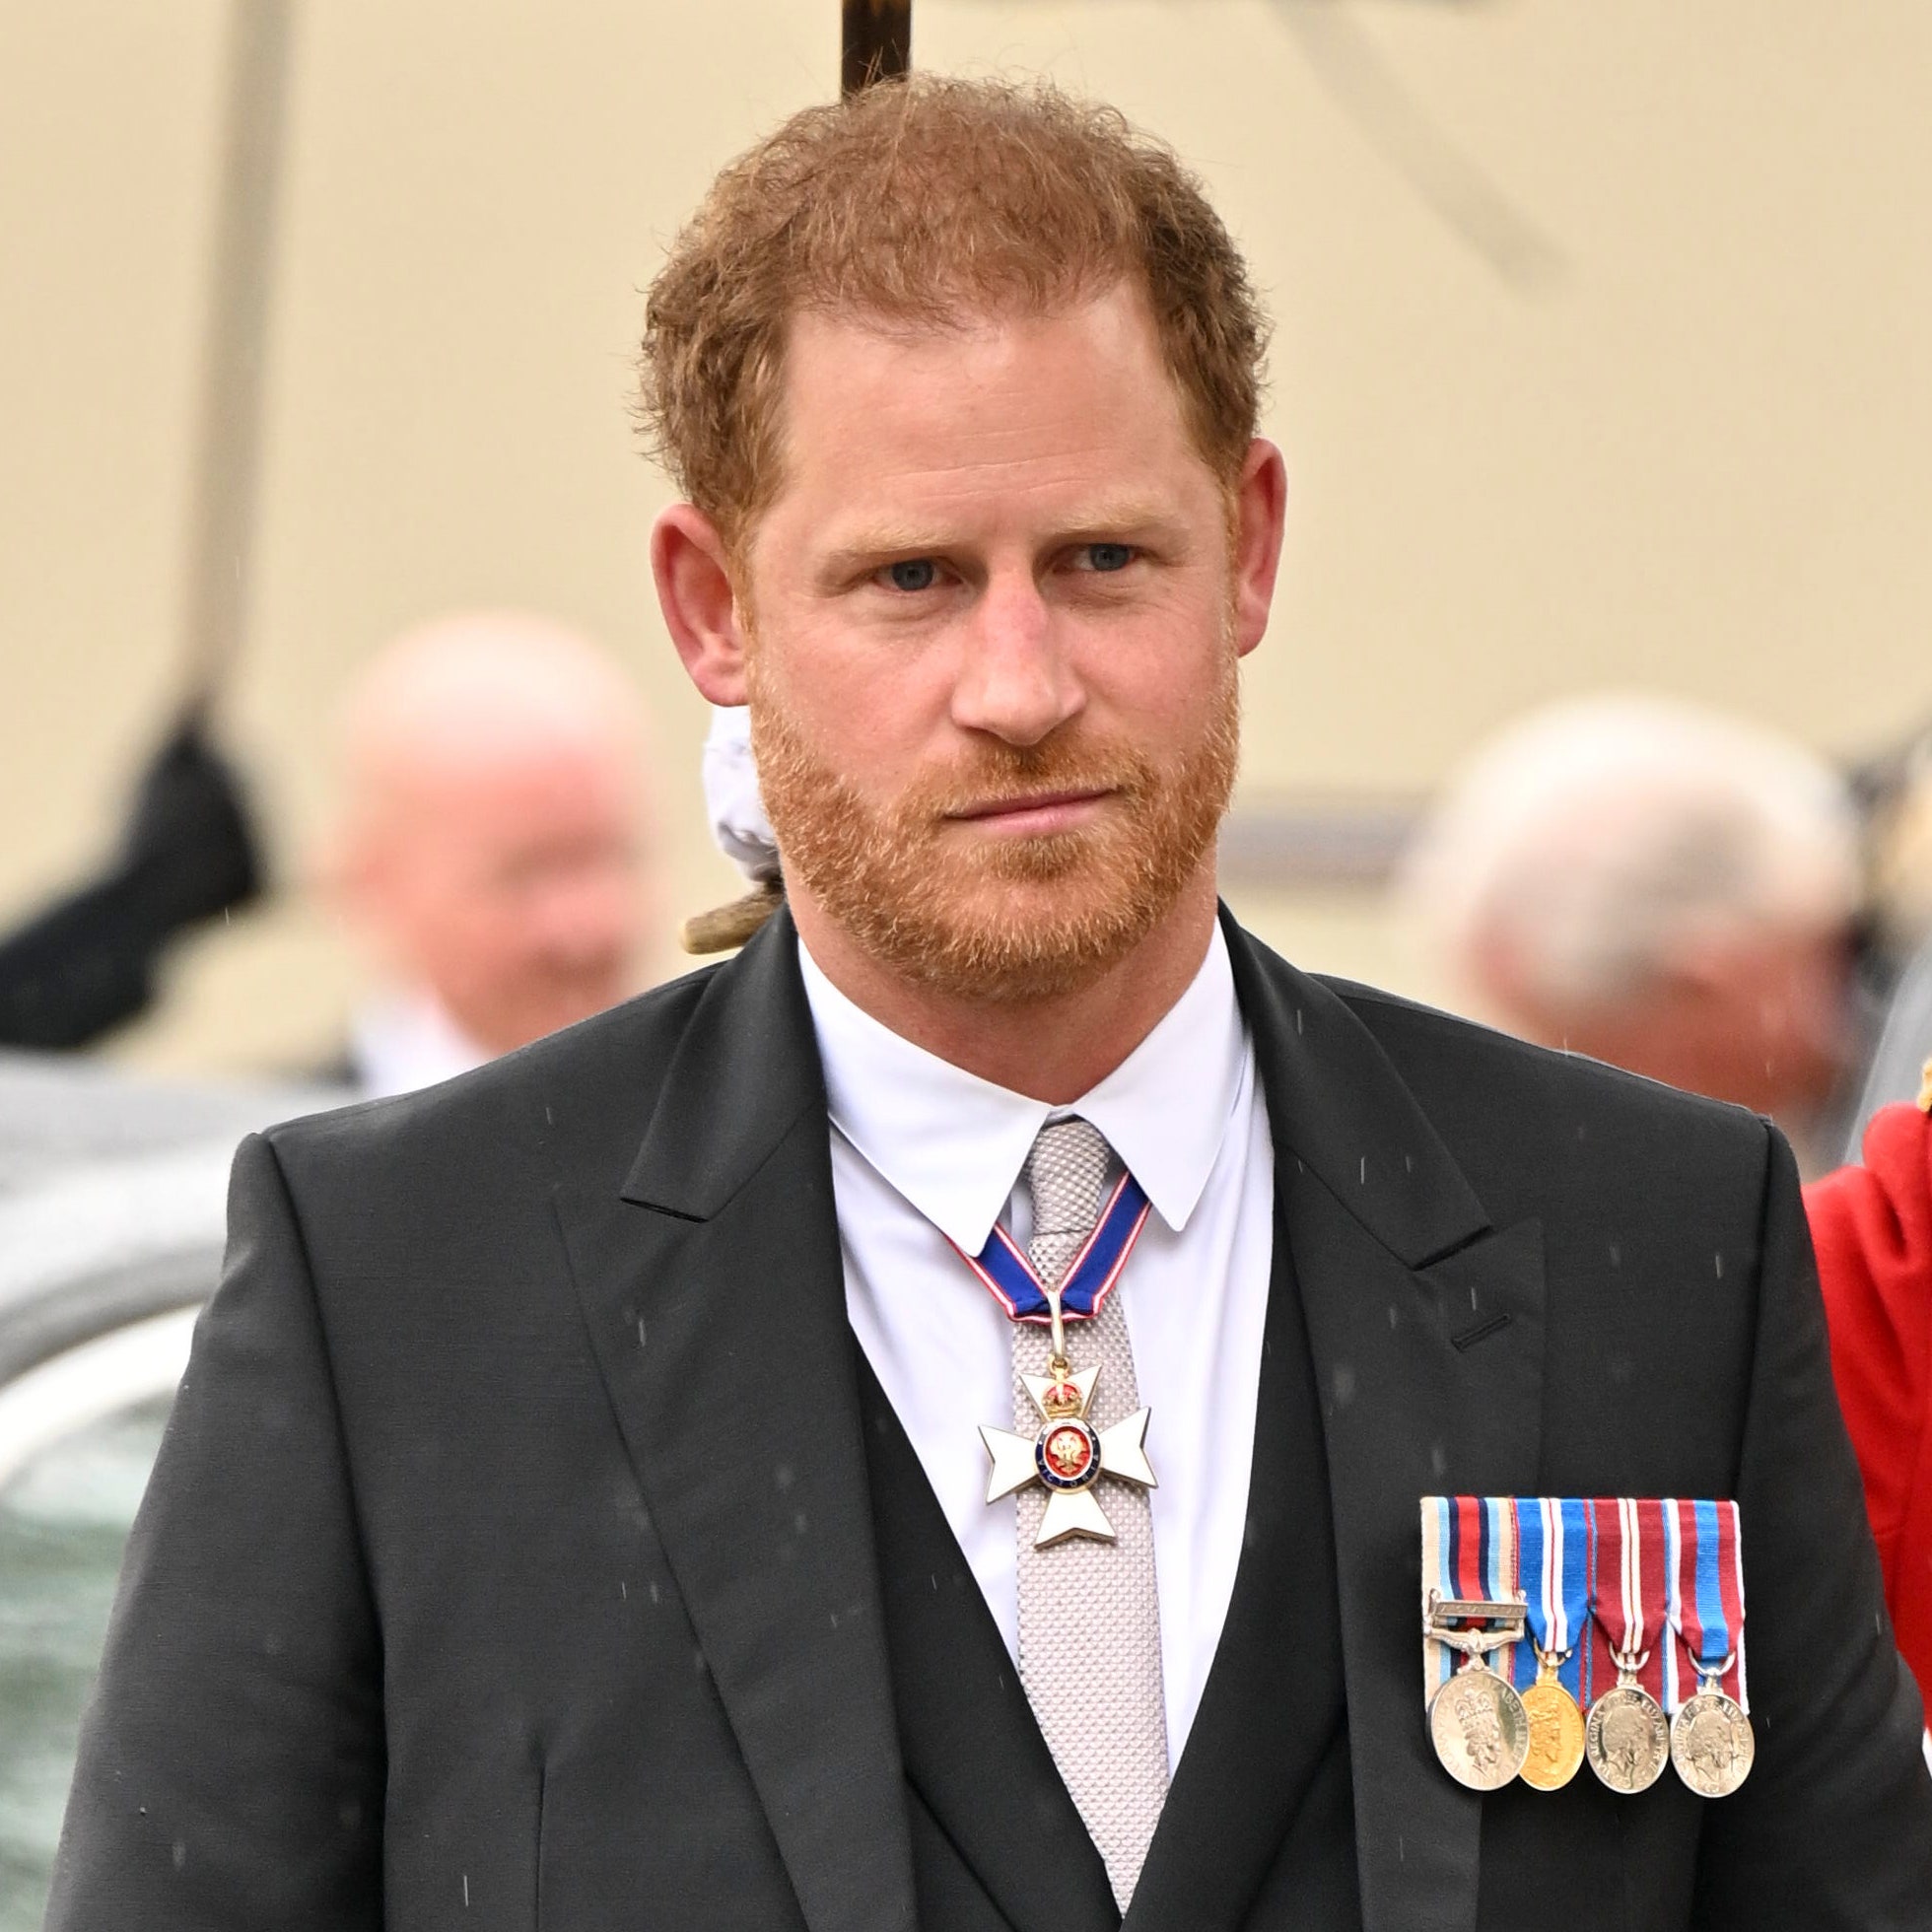 Prince Harry To Appear At London Event in May